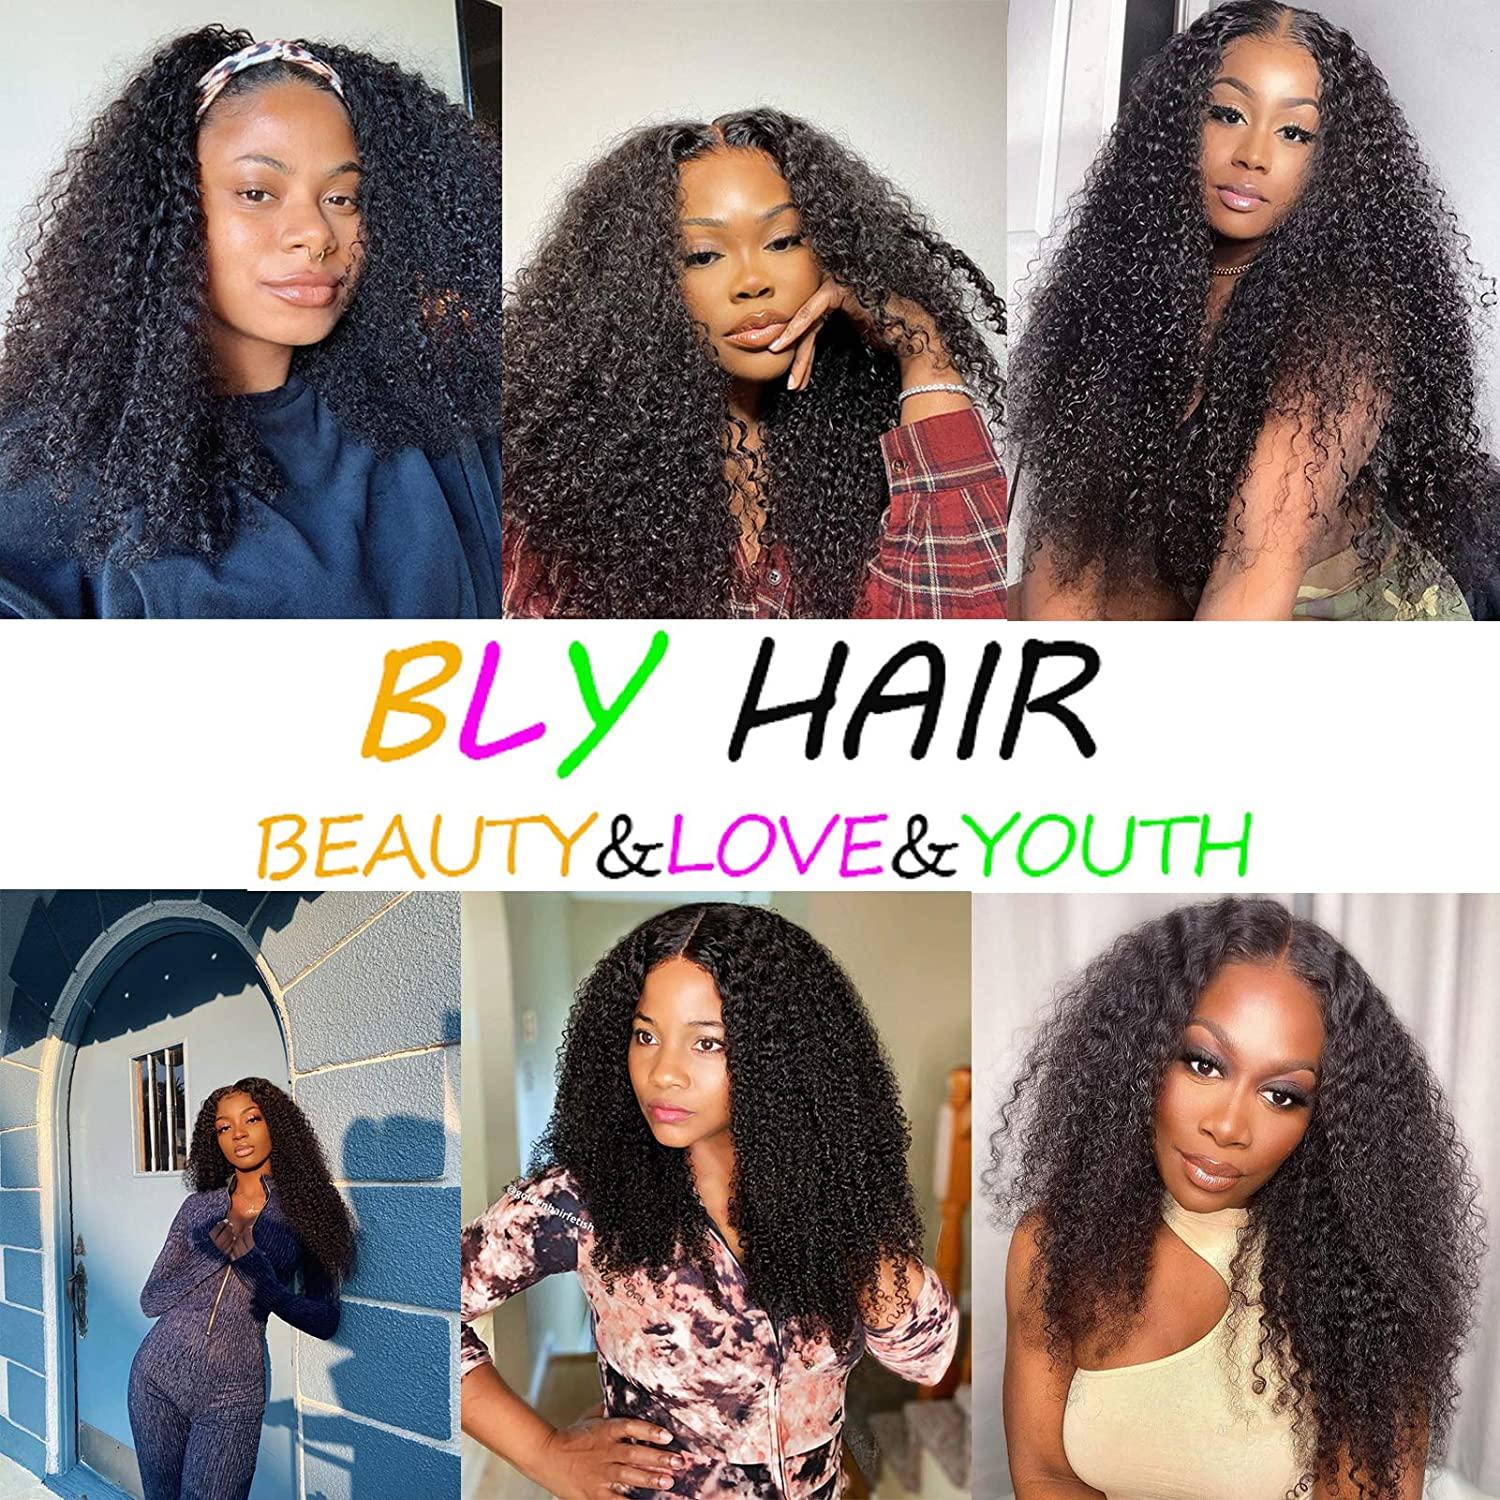 BLY Lace Front Wigs Human Hair Kinky Curly Afro Curly Hair 20 Inch 150%  Density Pre Plucked Glueless Wig for Black Women 20 Inch (Pack of 1) 4x4  Afro Curly Wig